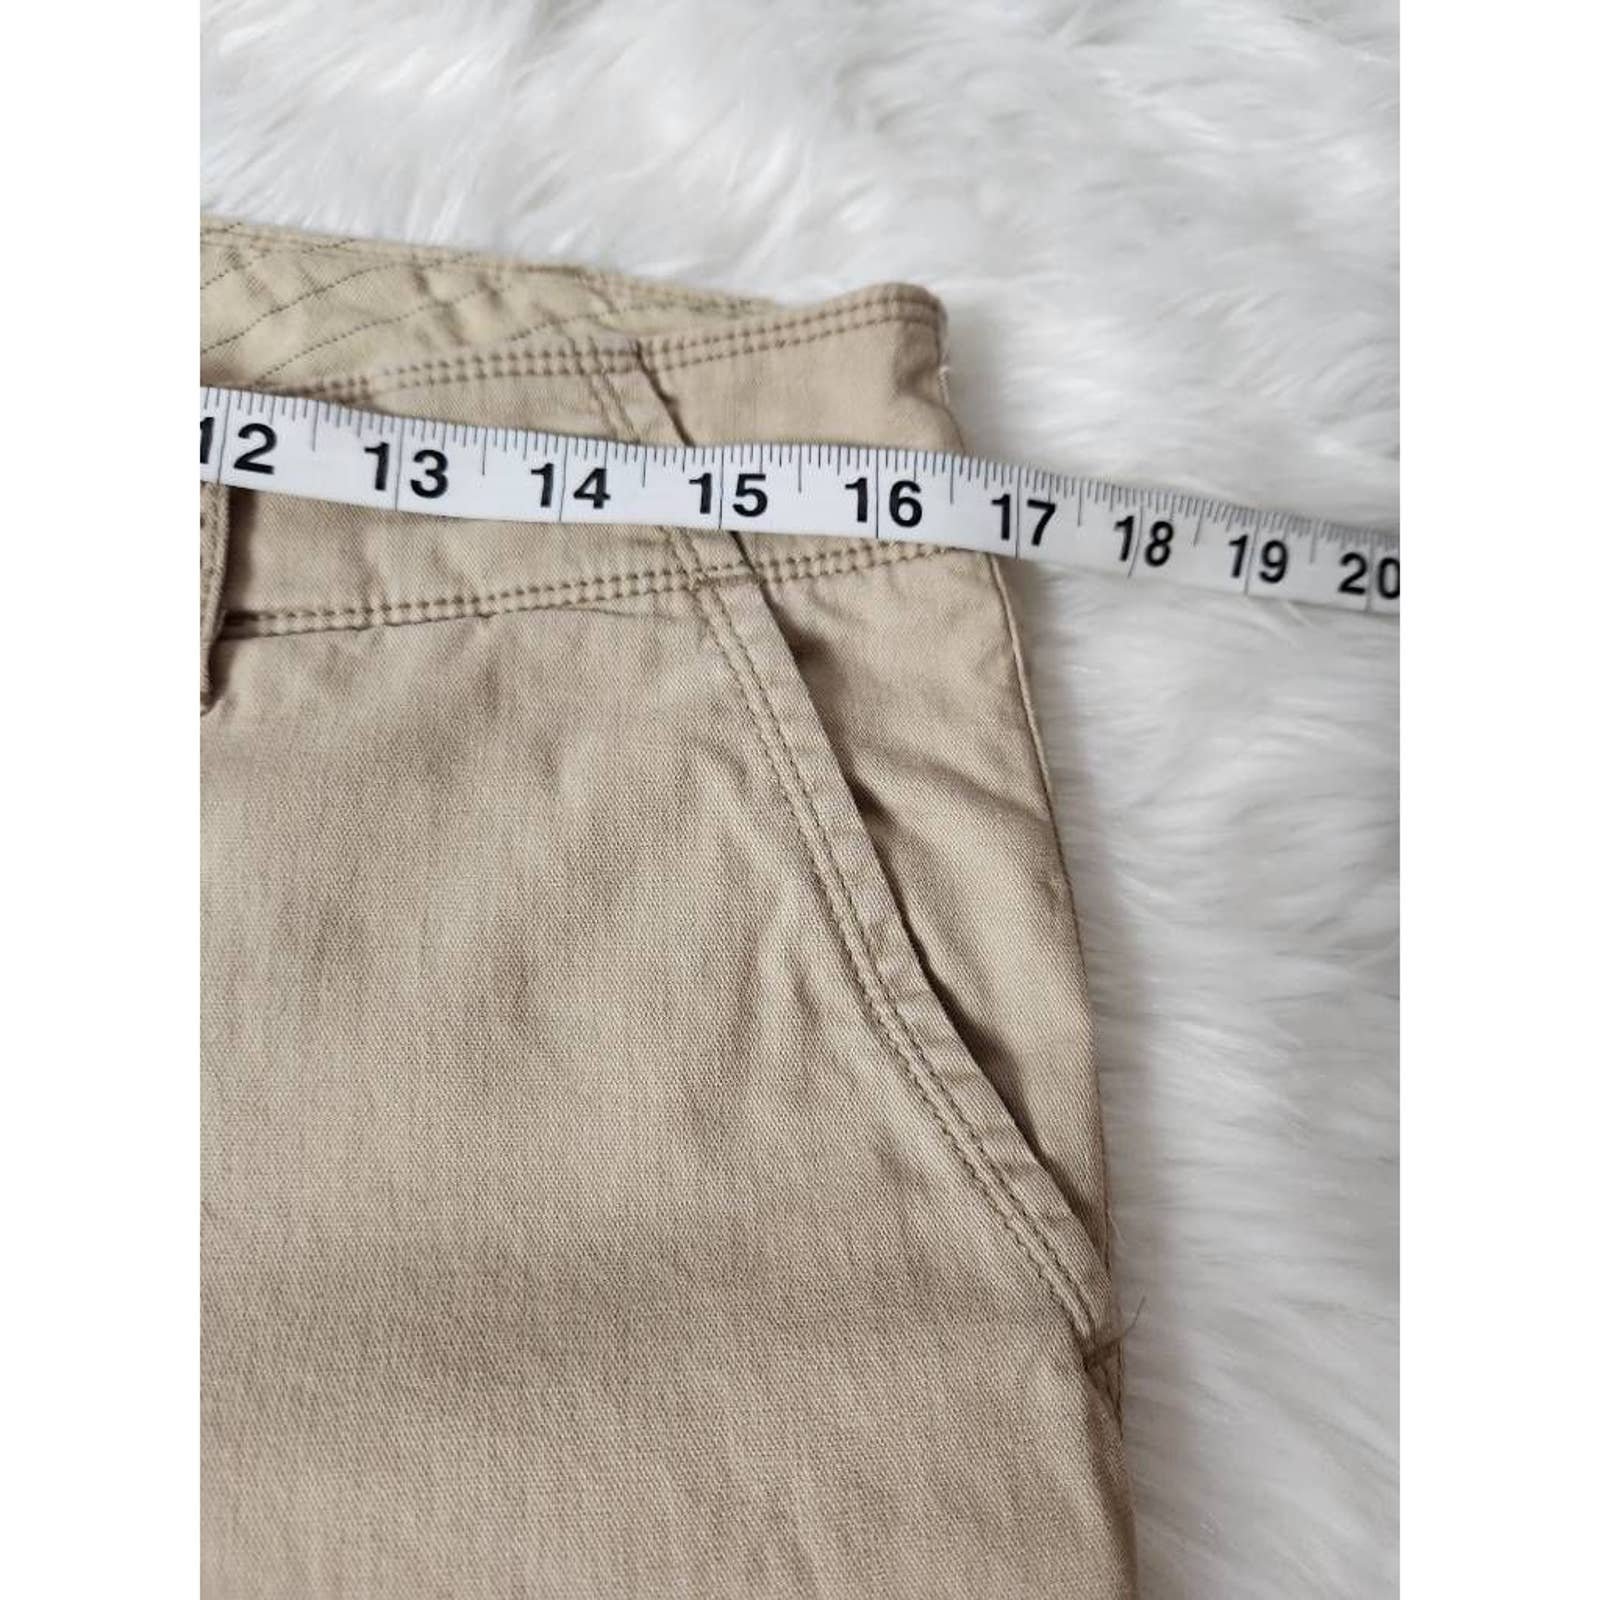 good price American Eagle Outfitters Womens Straight Leg Pants Beige Mid Rise Stretch 10 ONOuEVrsD for sale